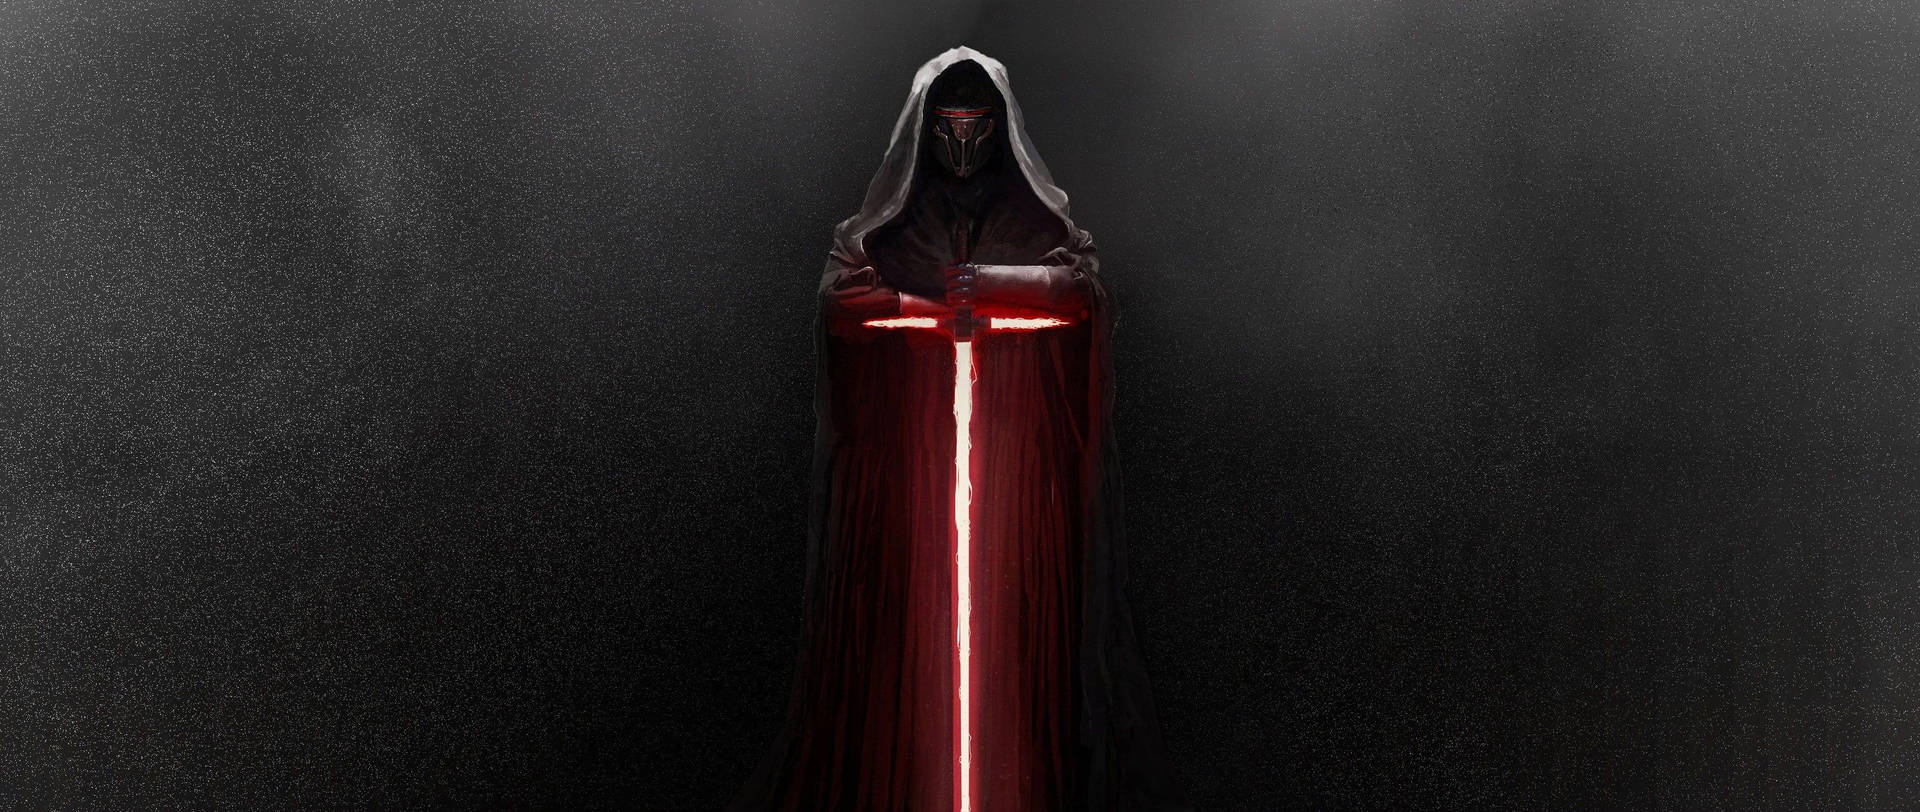 The powerful Sith Lord Darth Revan Wallpaper